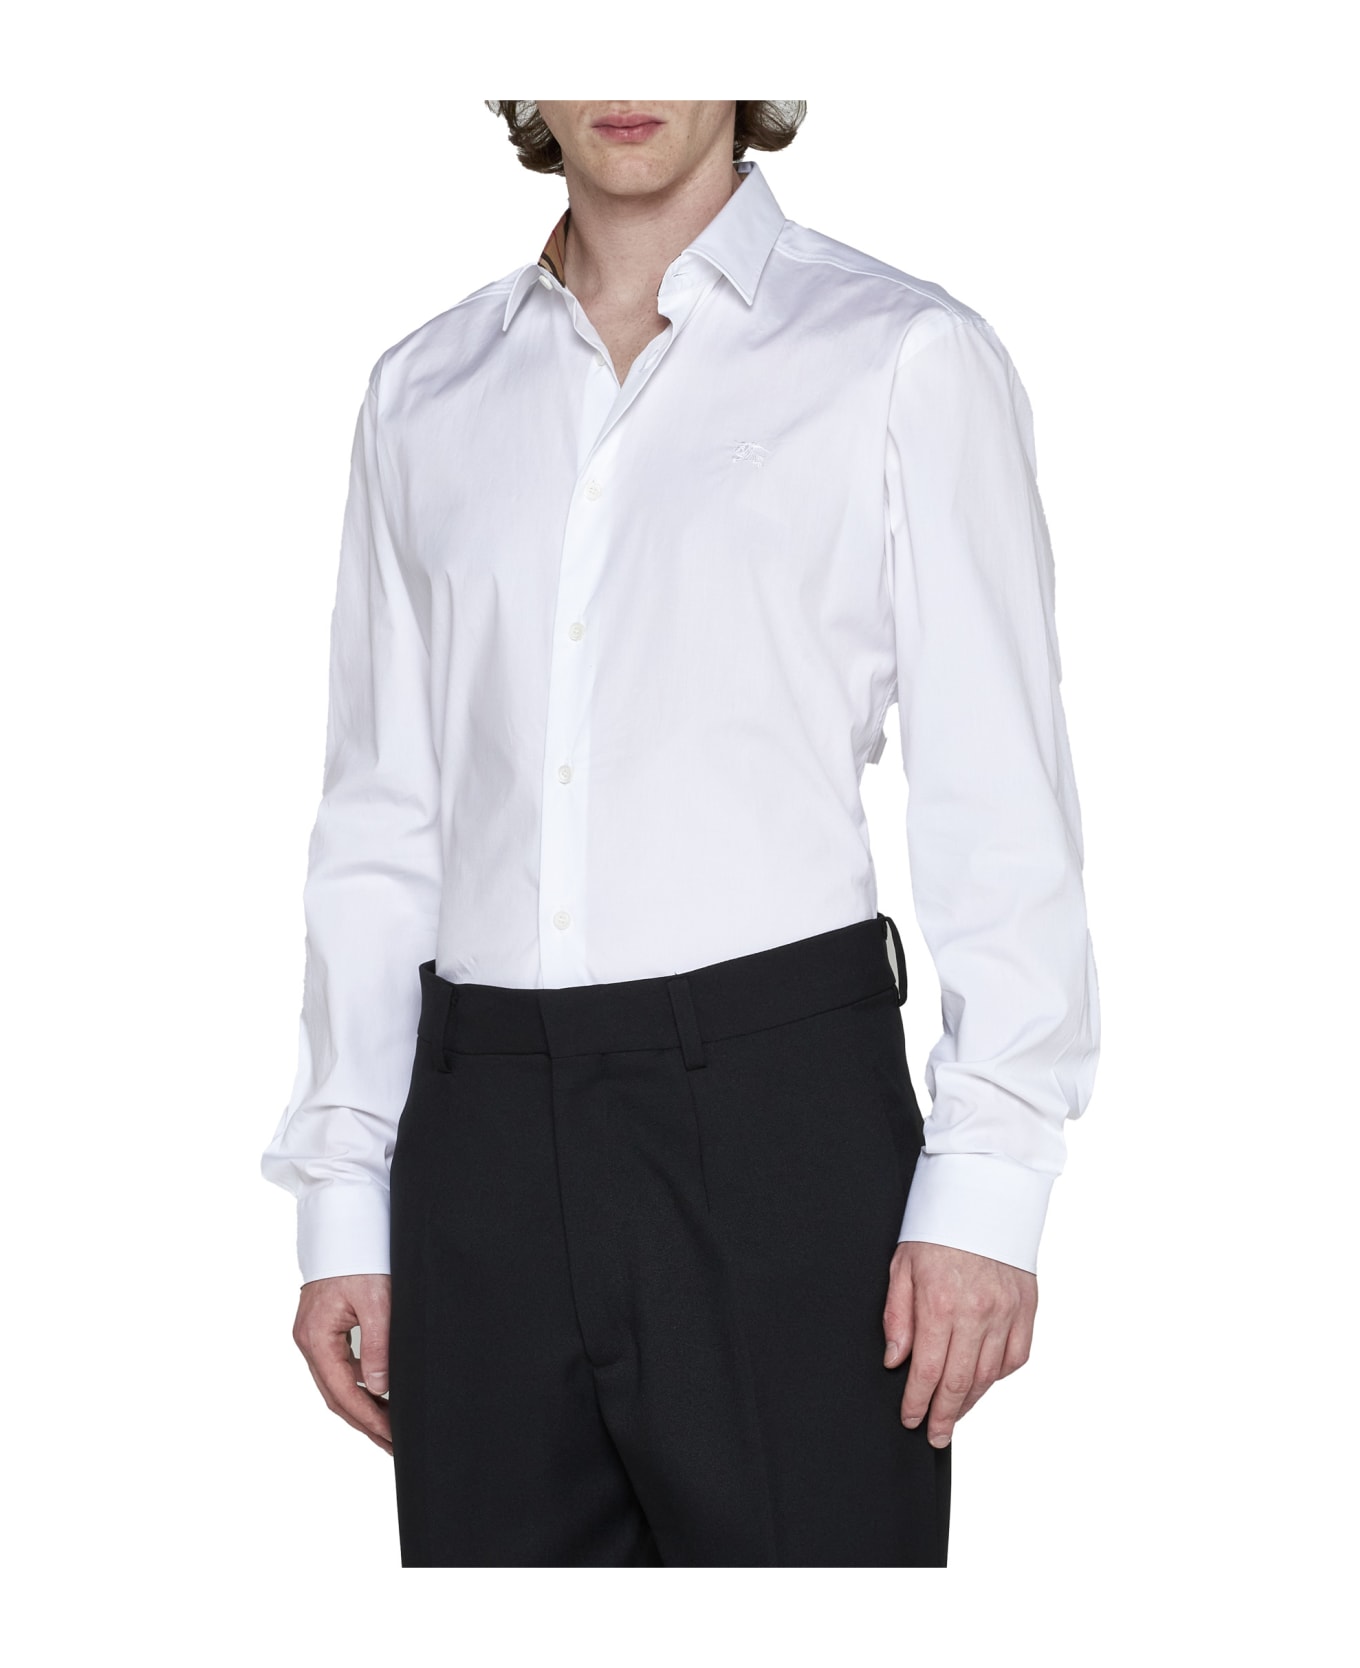 Burberry Sherfield Shirt In White Cotton - White